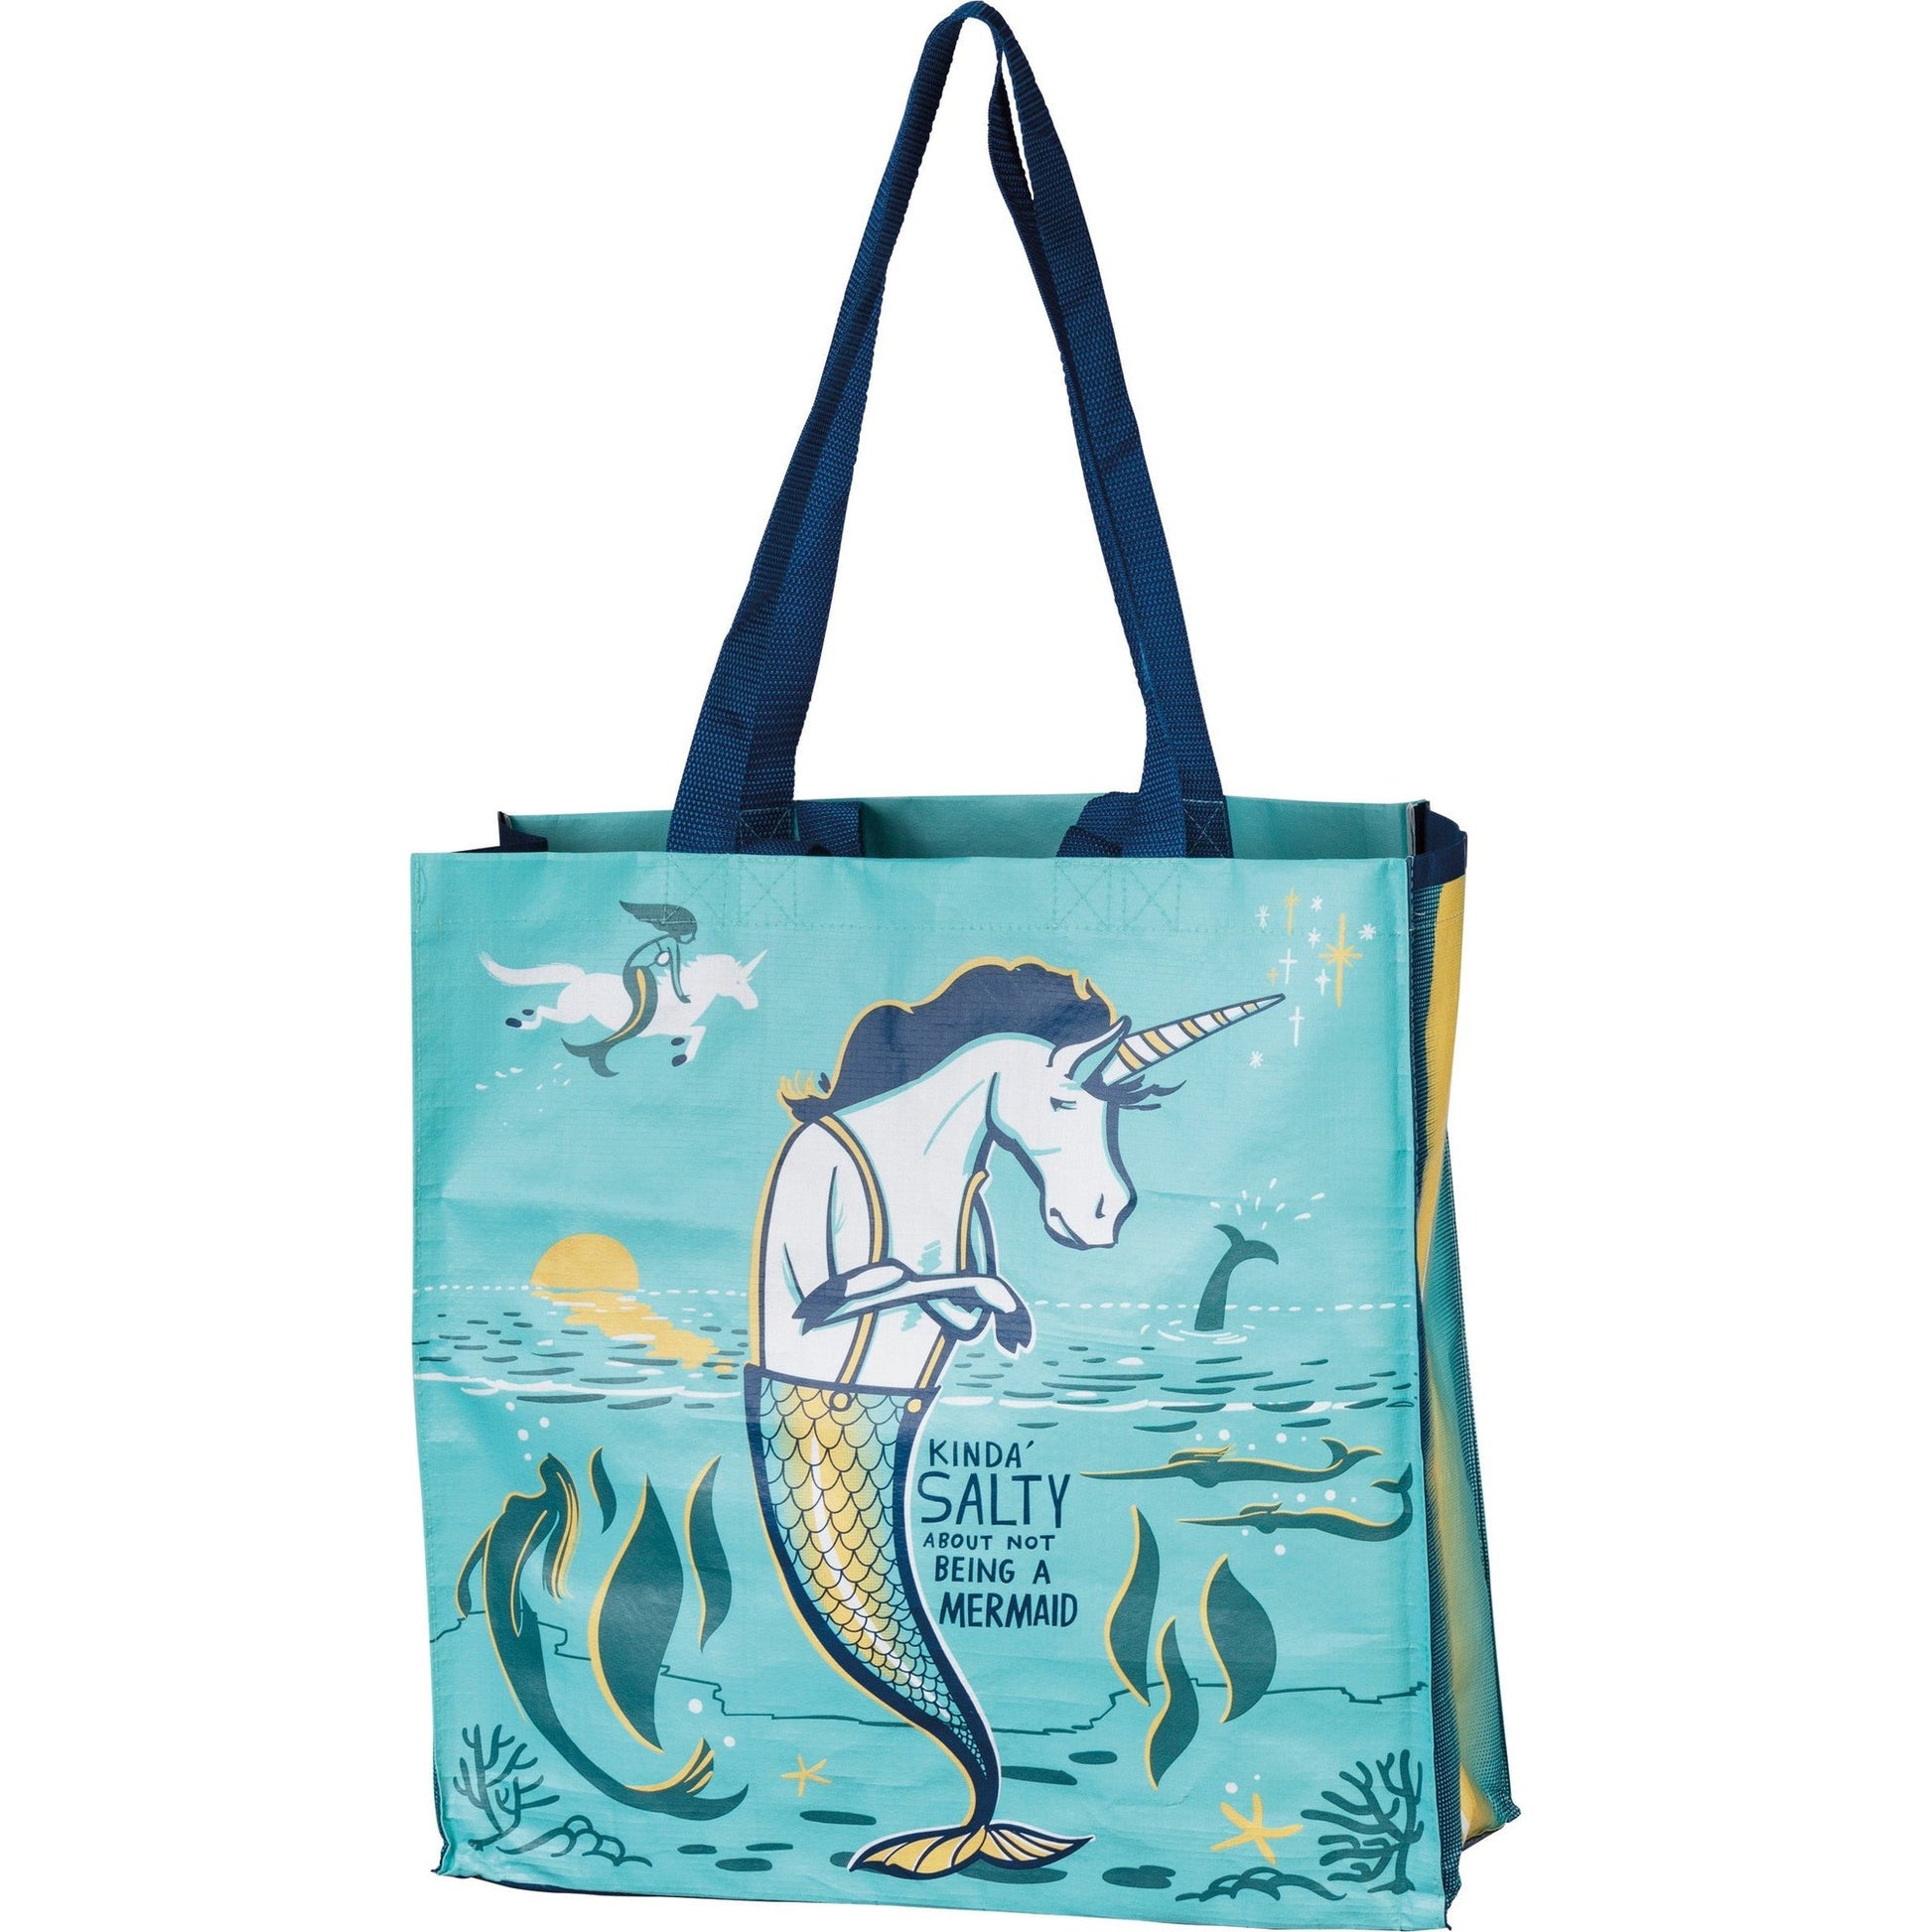 Kinda' Salty About Not Being A Mermaid Large Market Tote Bag in Mermaid Unicorn Design | 15.50" x 15.25" x 6"